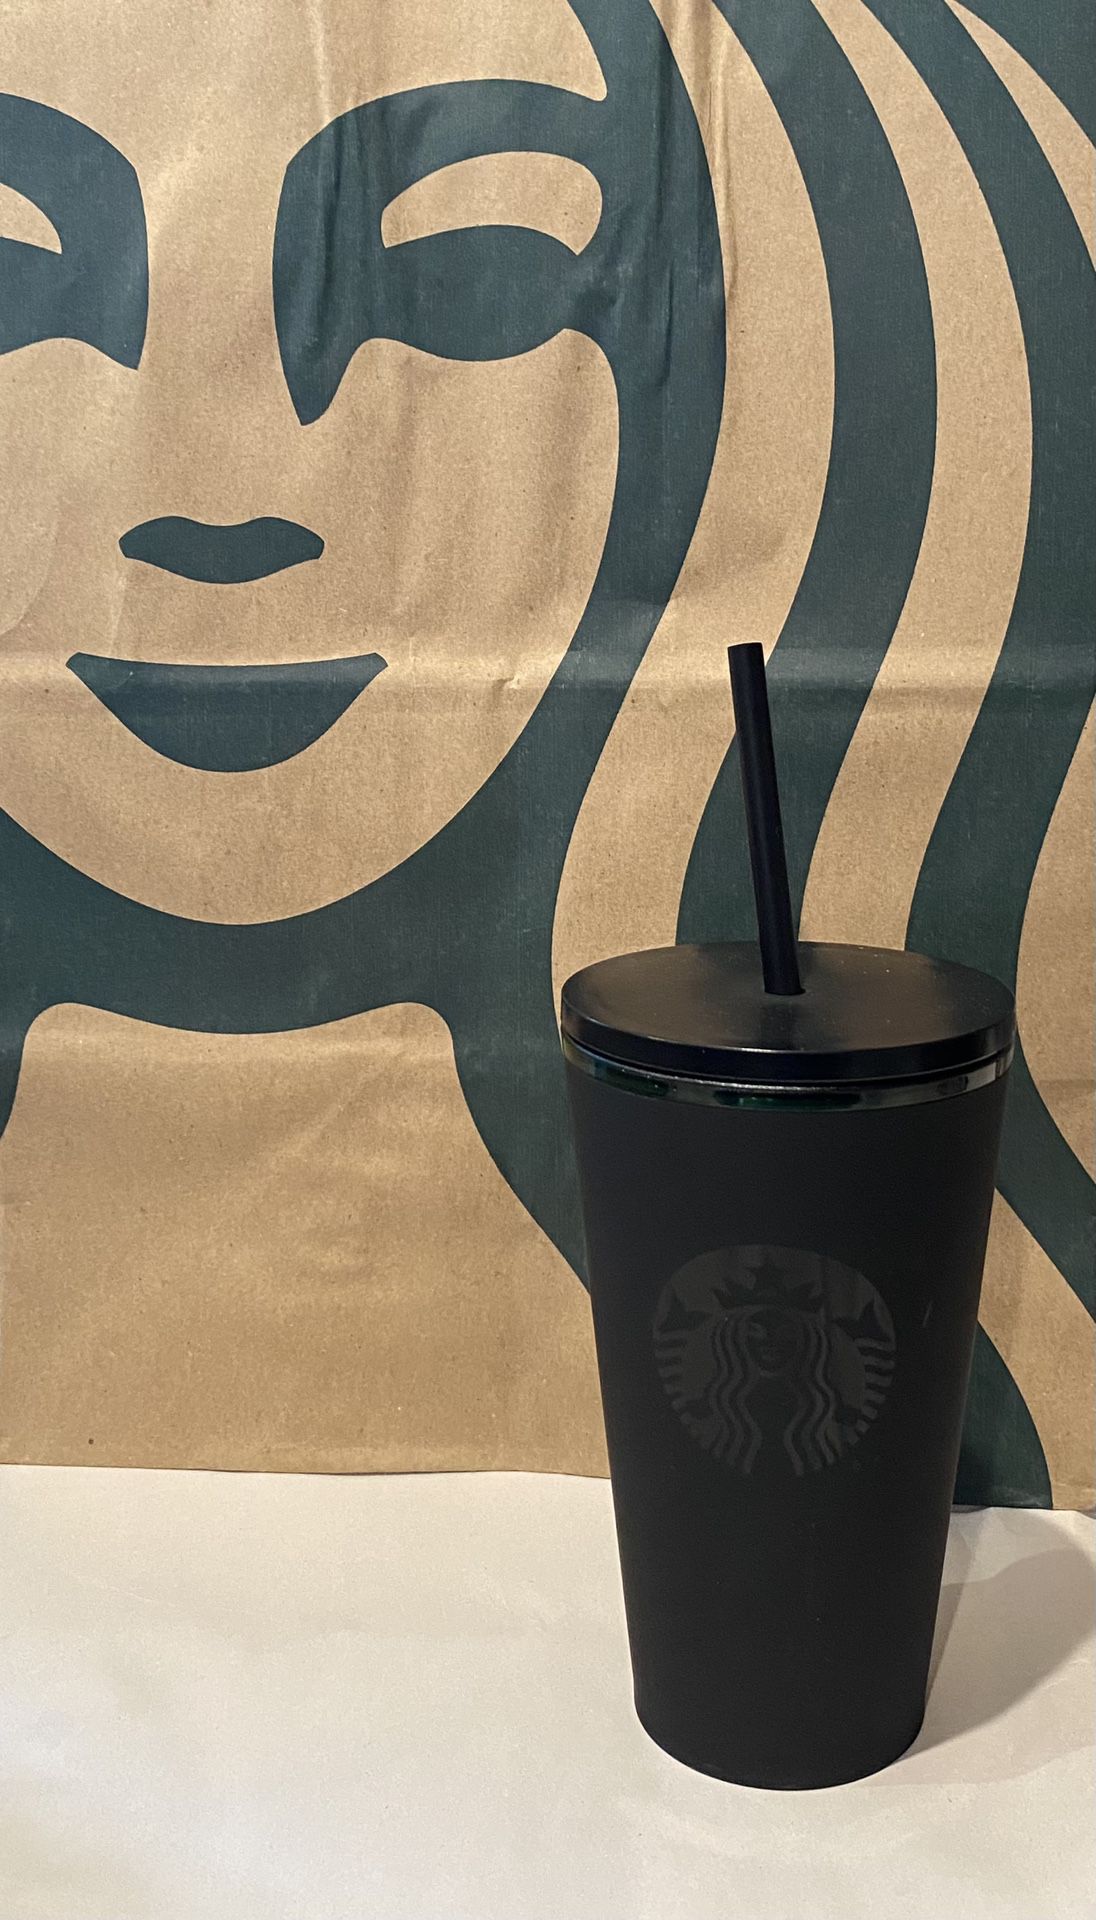 Starbucks Matte Black with Green Rimmed Soft Touch Tumbler/Cup